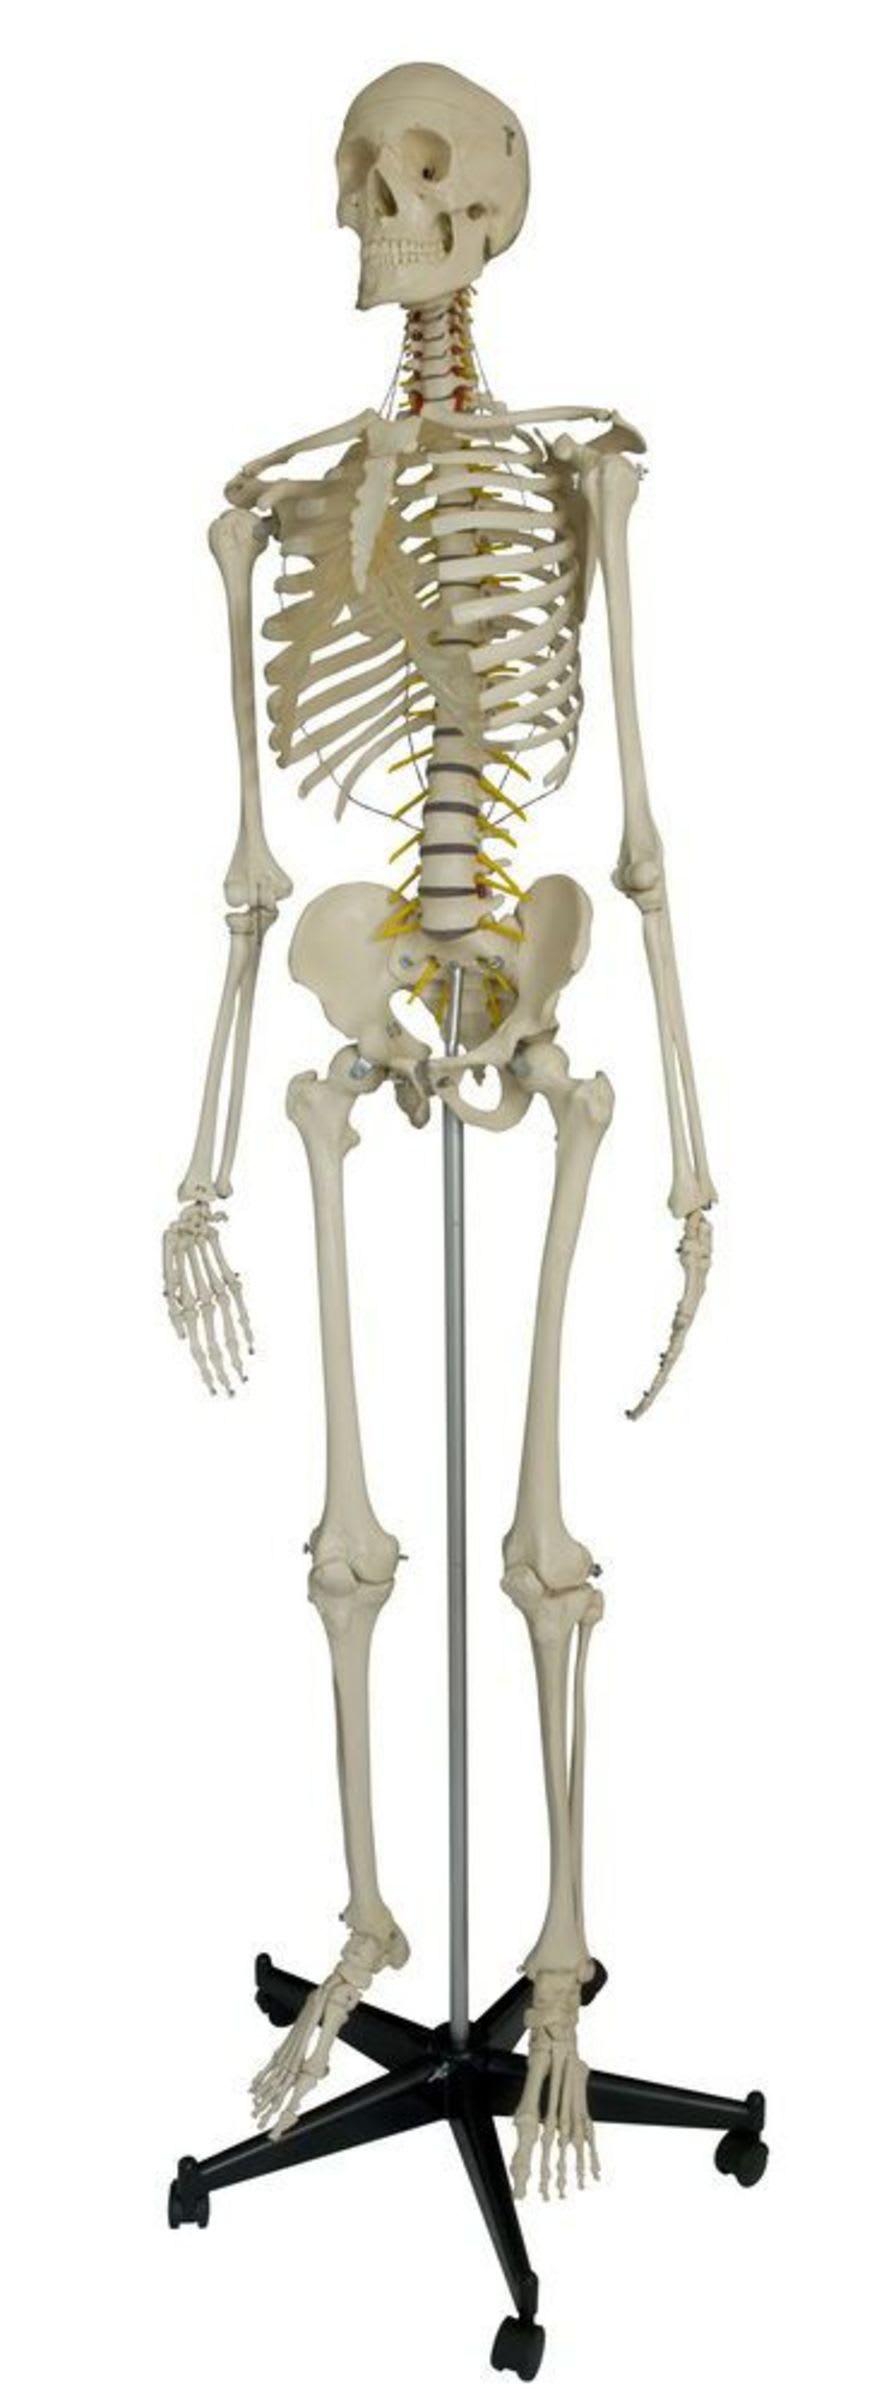 Skeleton anatomical model / with flexible spine / articulated A200.2 RÜDIGER - ANATOMIE